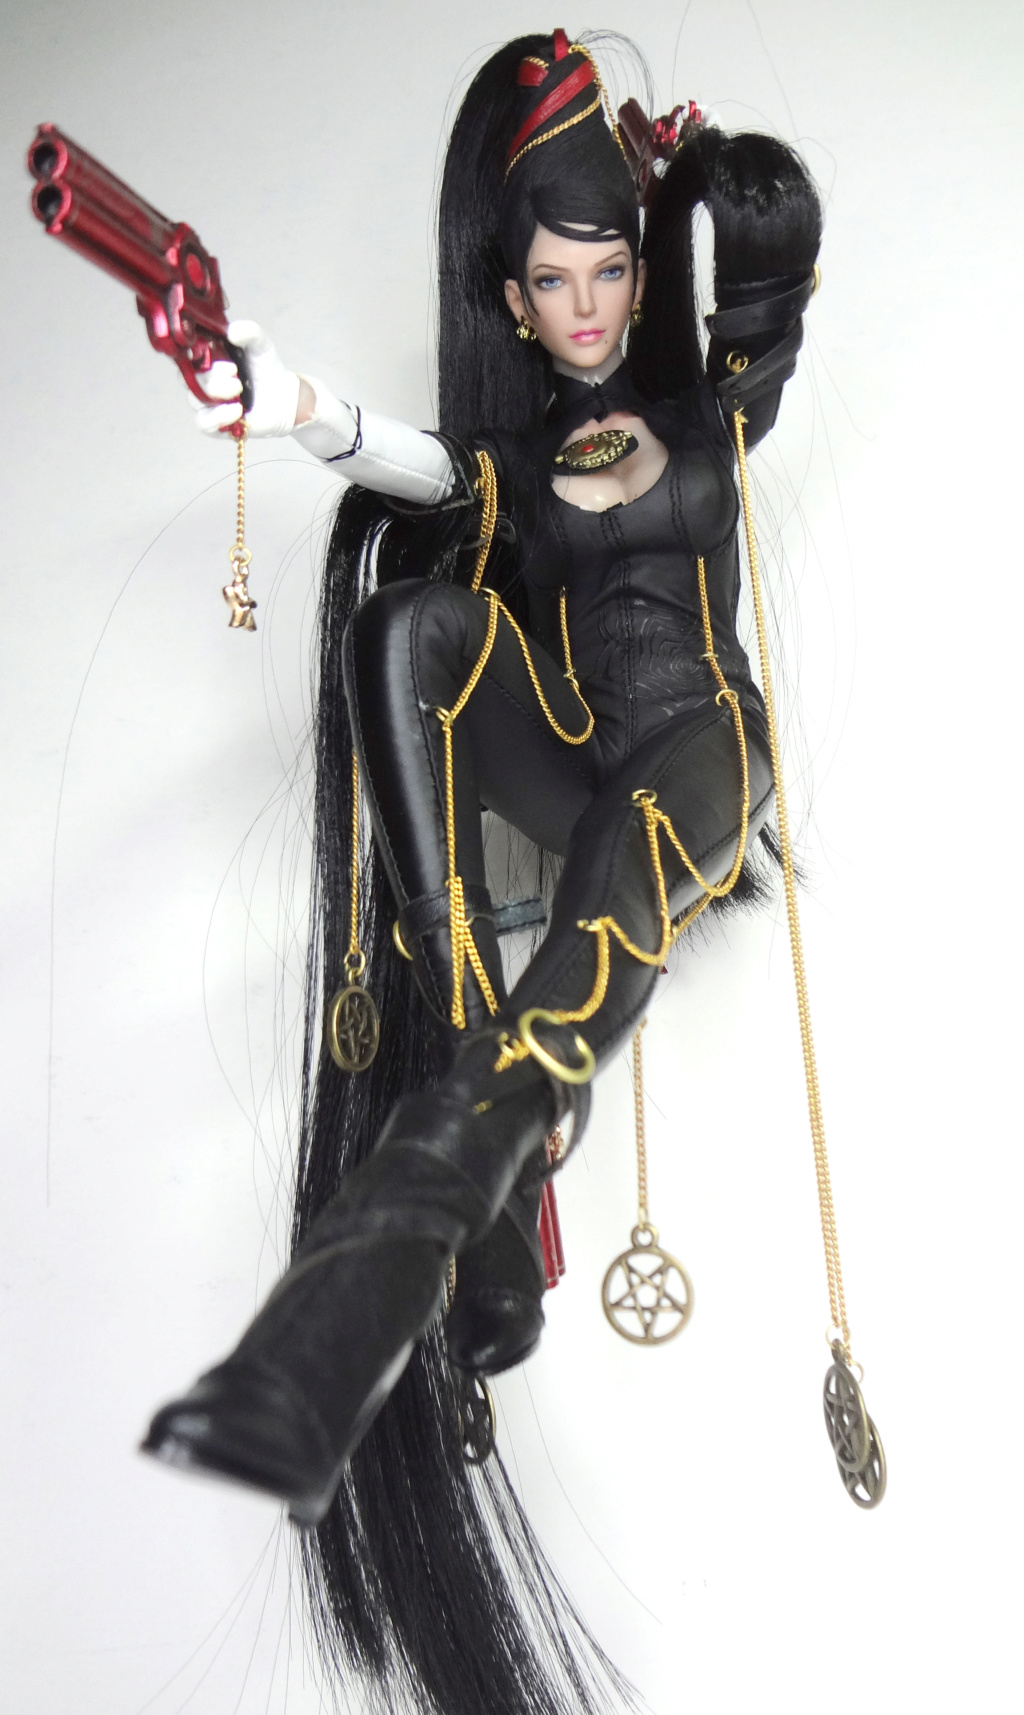 VideoGame-Based - NEW PRODUCT: Verycool: 1/6 Witch-Bei Jie (Bayonetta) movable doll #VCF-2057 (additional calf heightening piece) Dsc05210